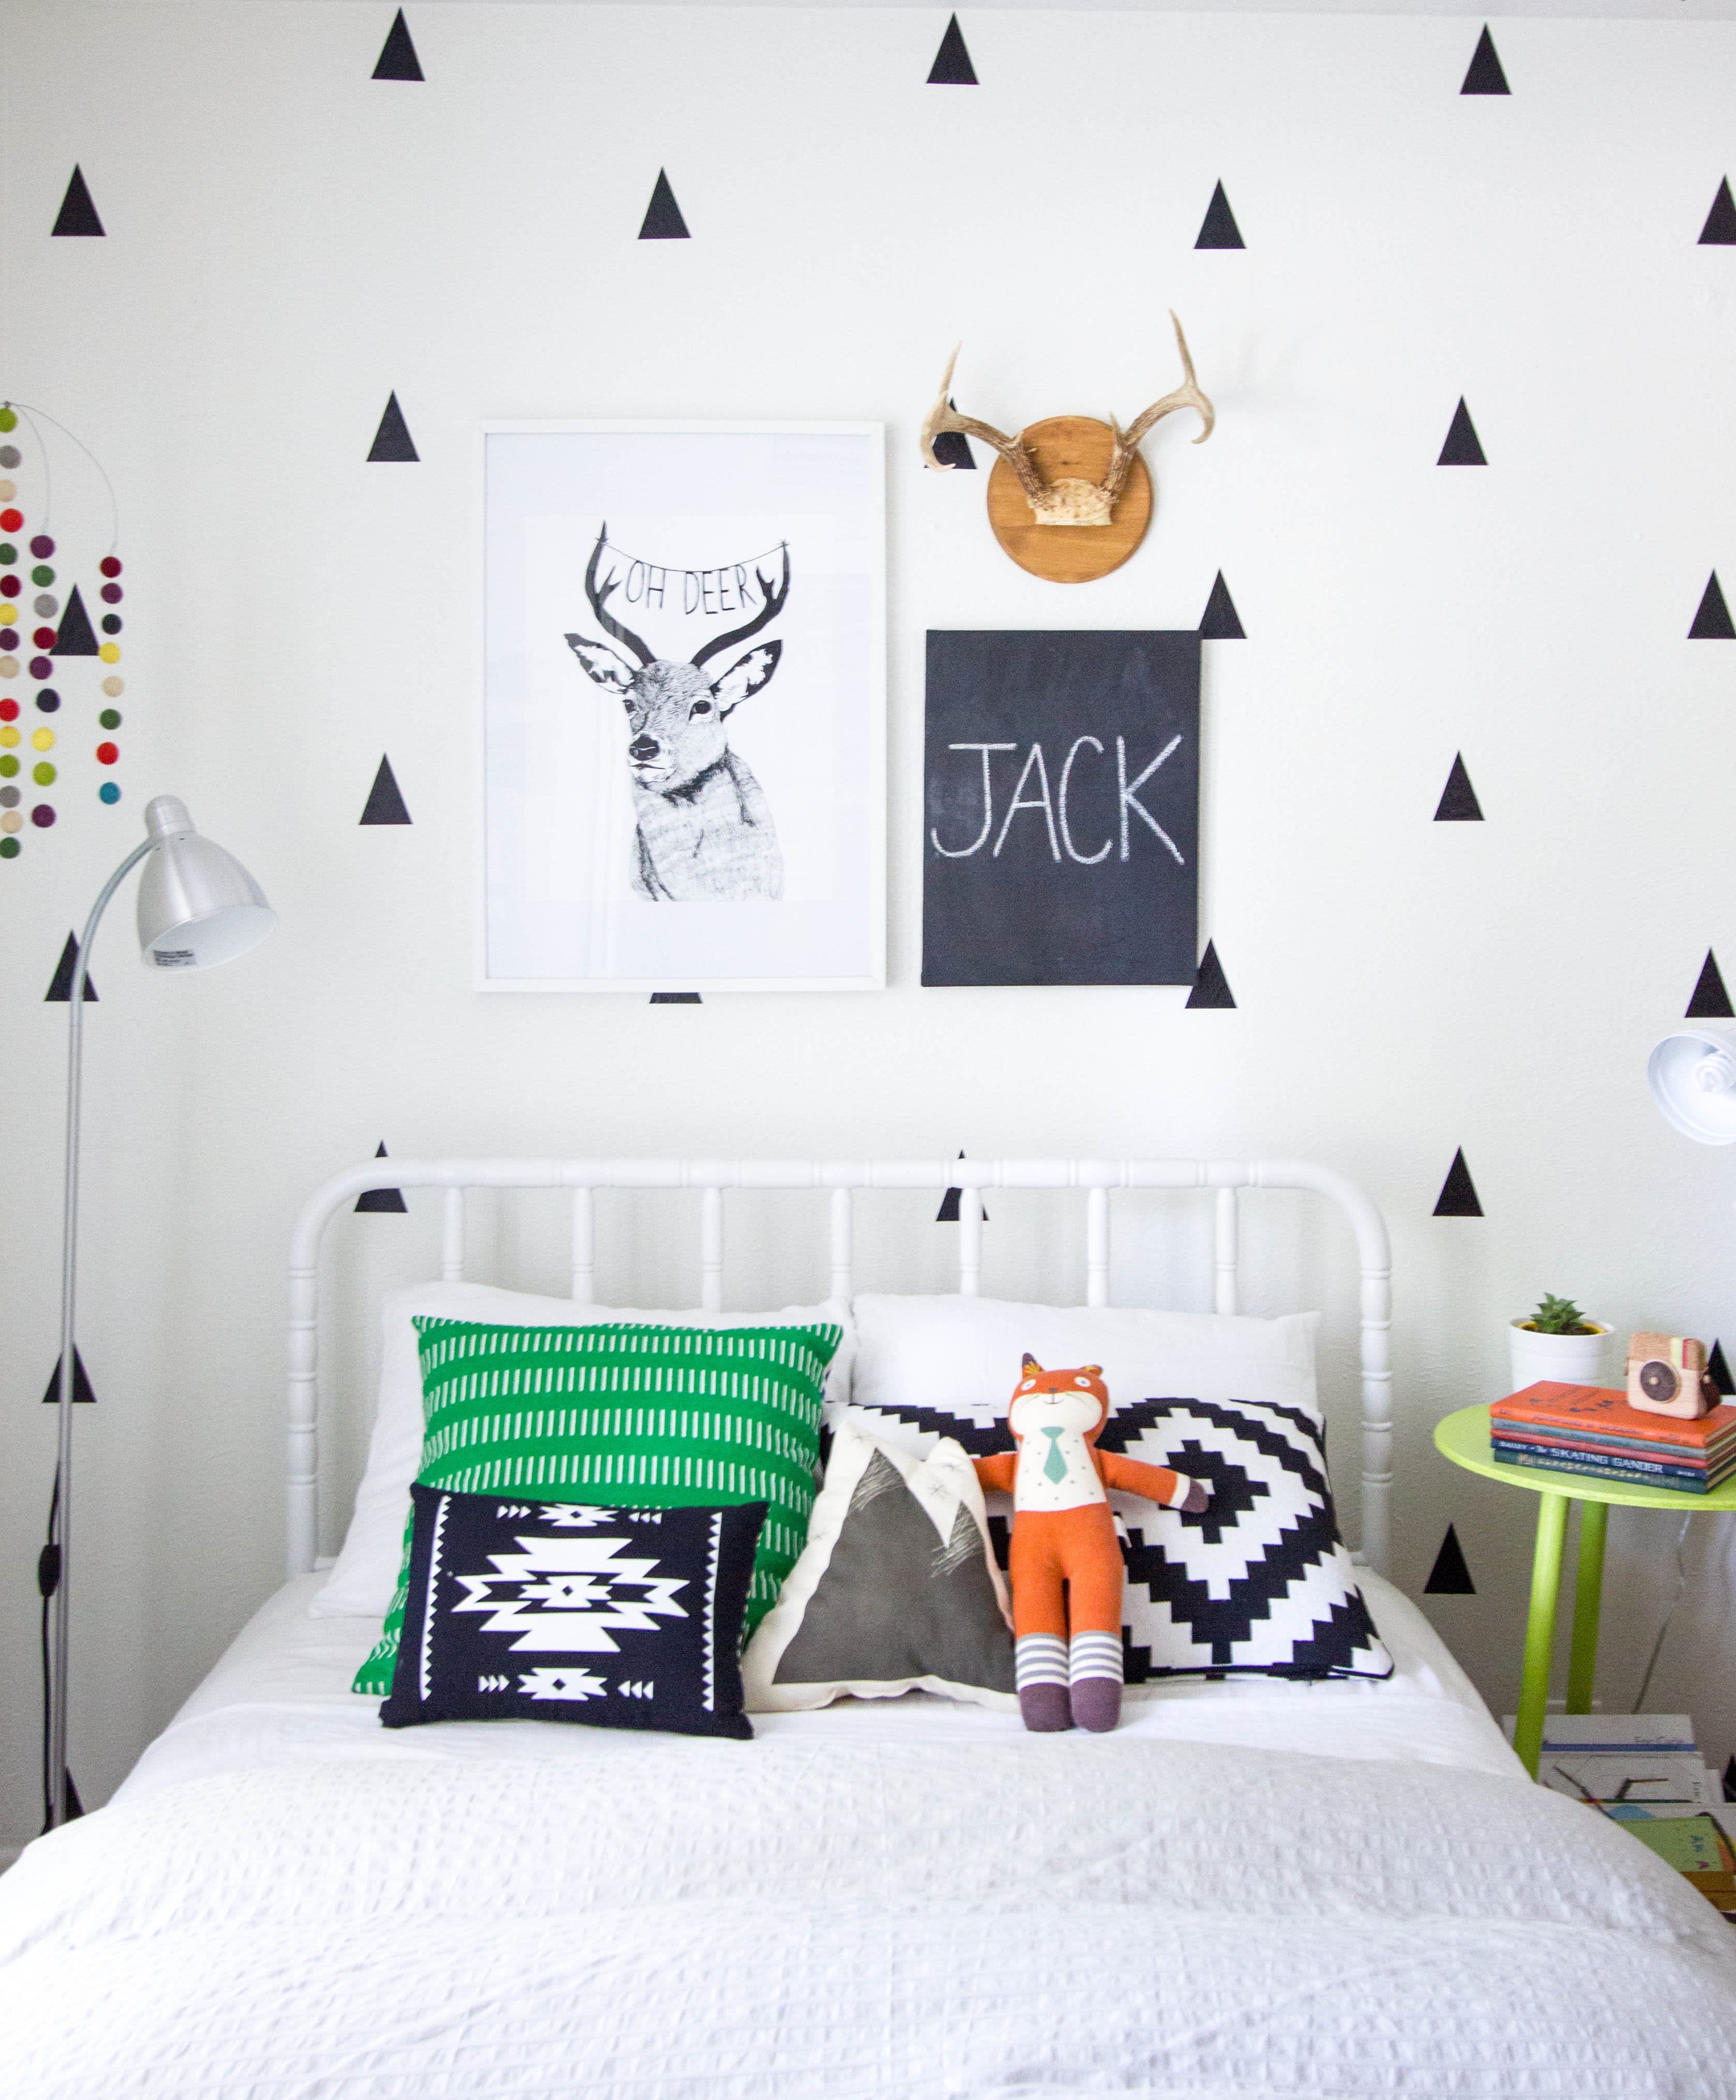 Trendy Kids Decor on a Budget: Black-on-White Wall Decals | Apartment ...